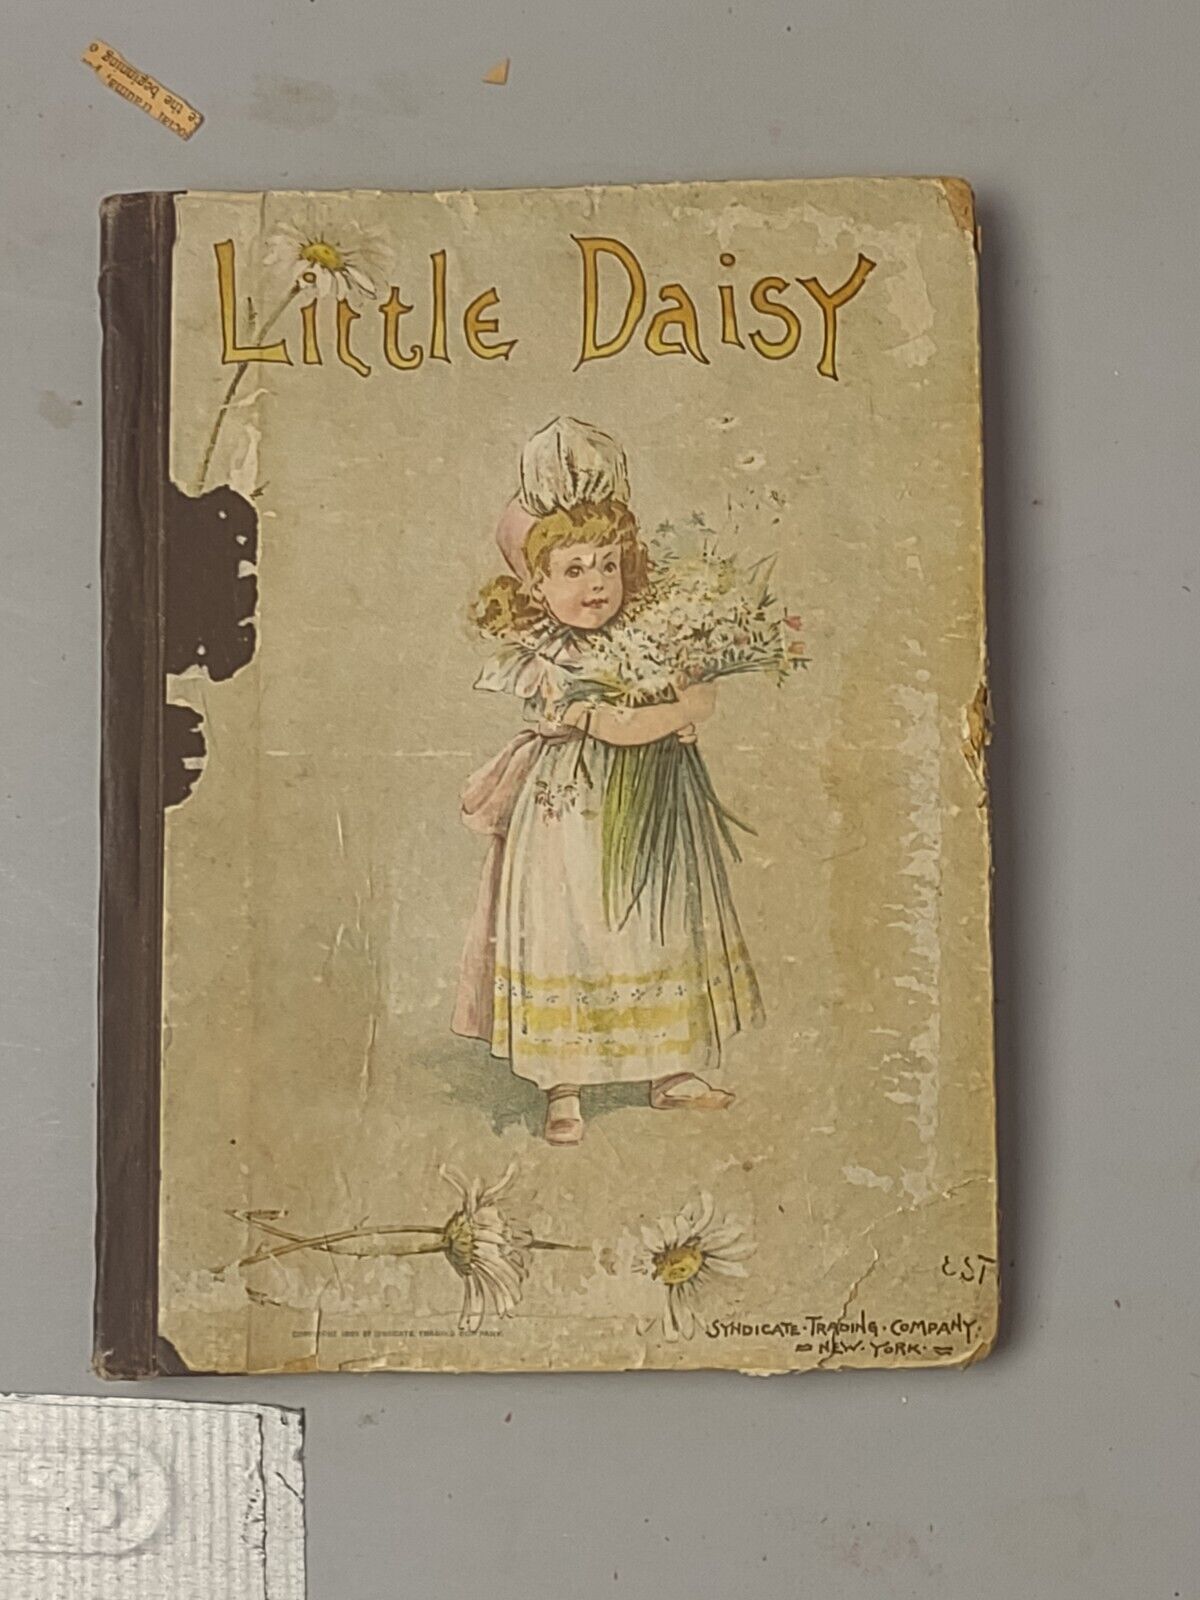 LITTLE DAISY  A BOOK OF STORY AND PICTURE FOR LITTLE FOLKS VTG 1889   102623